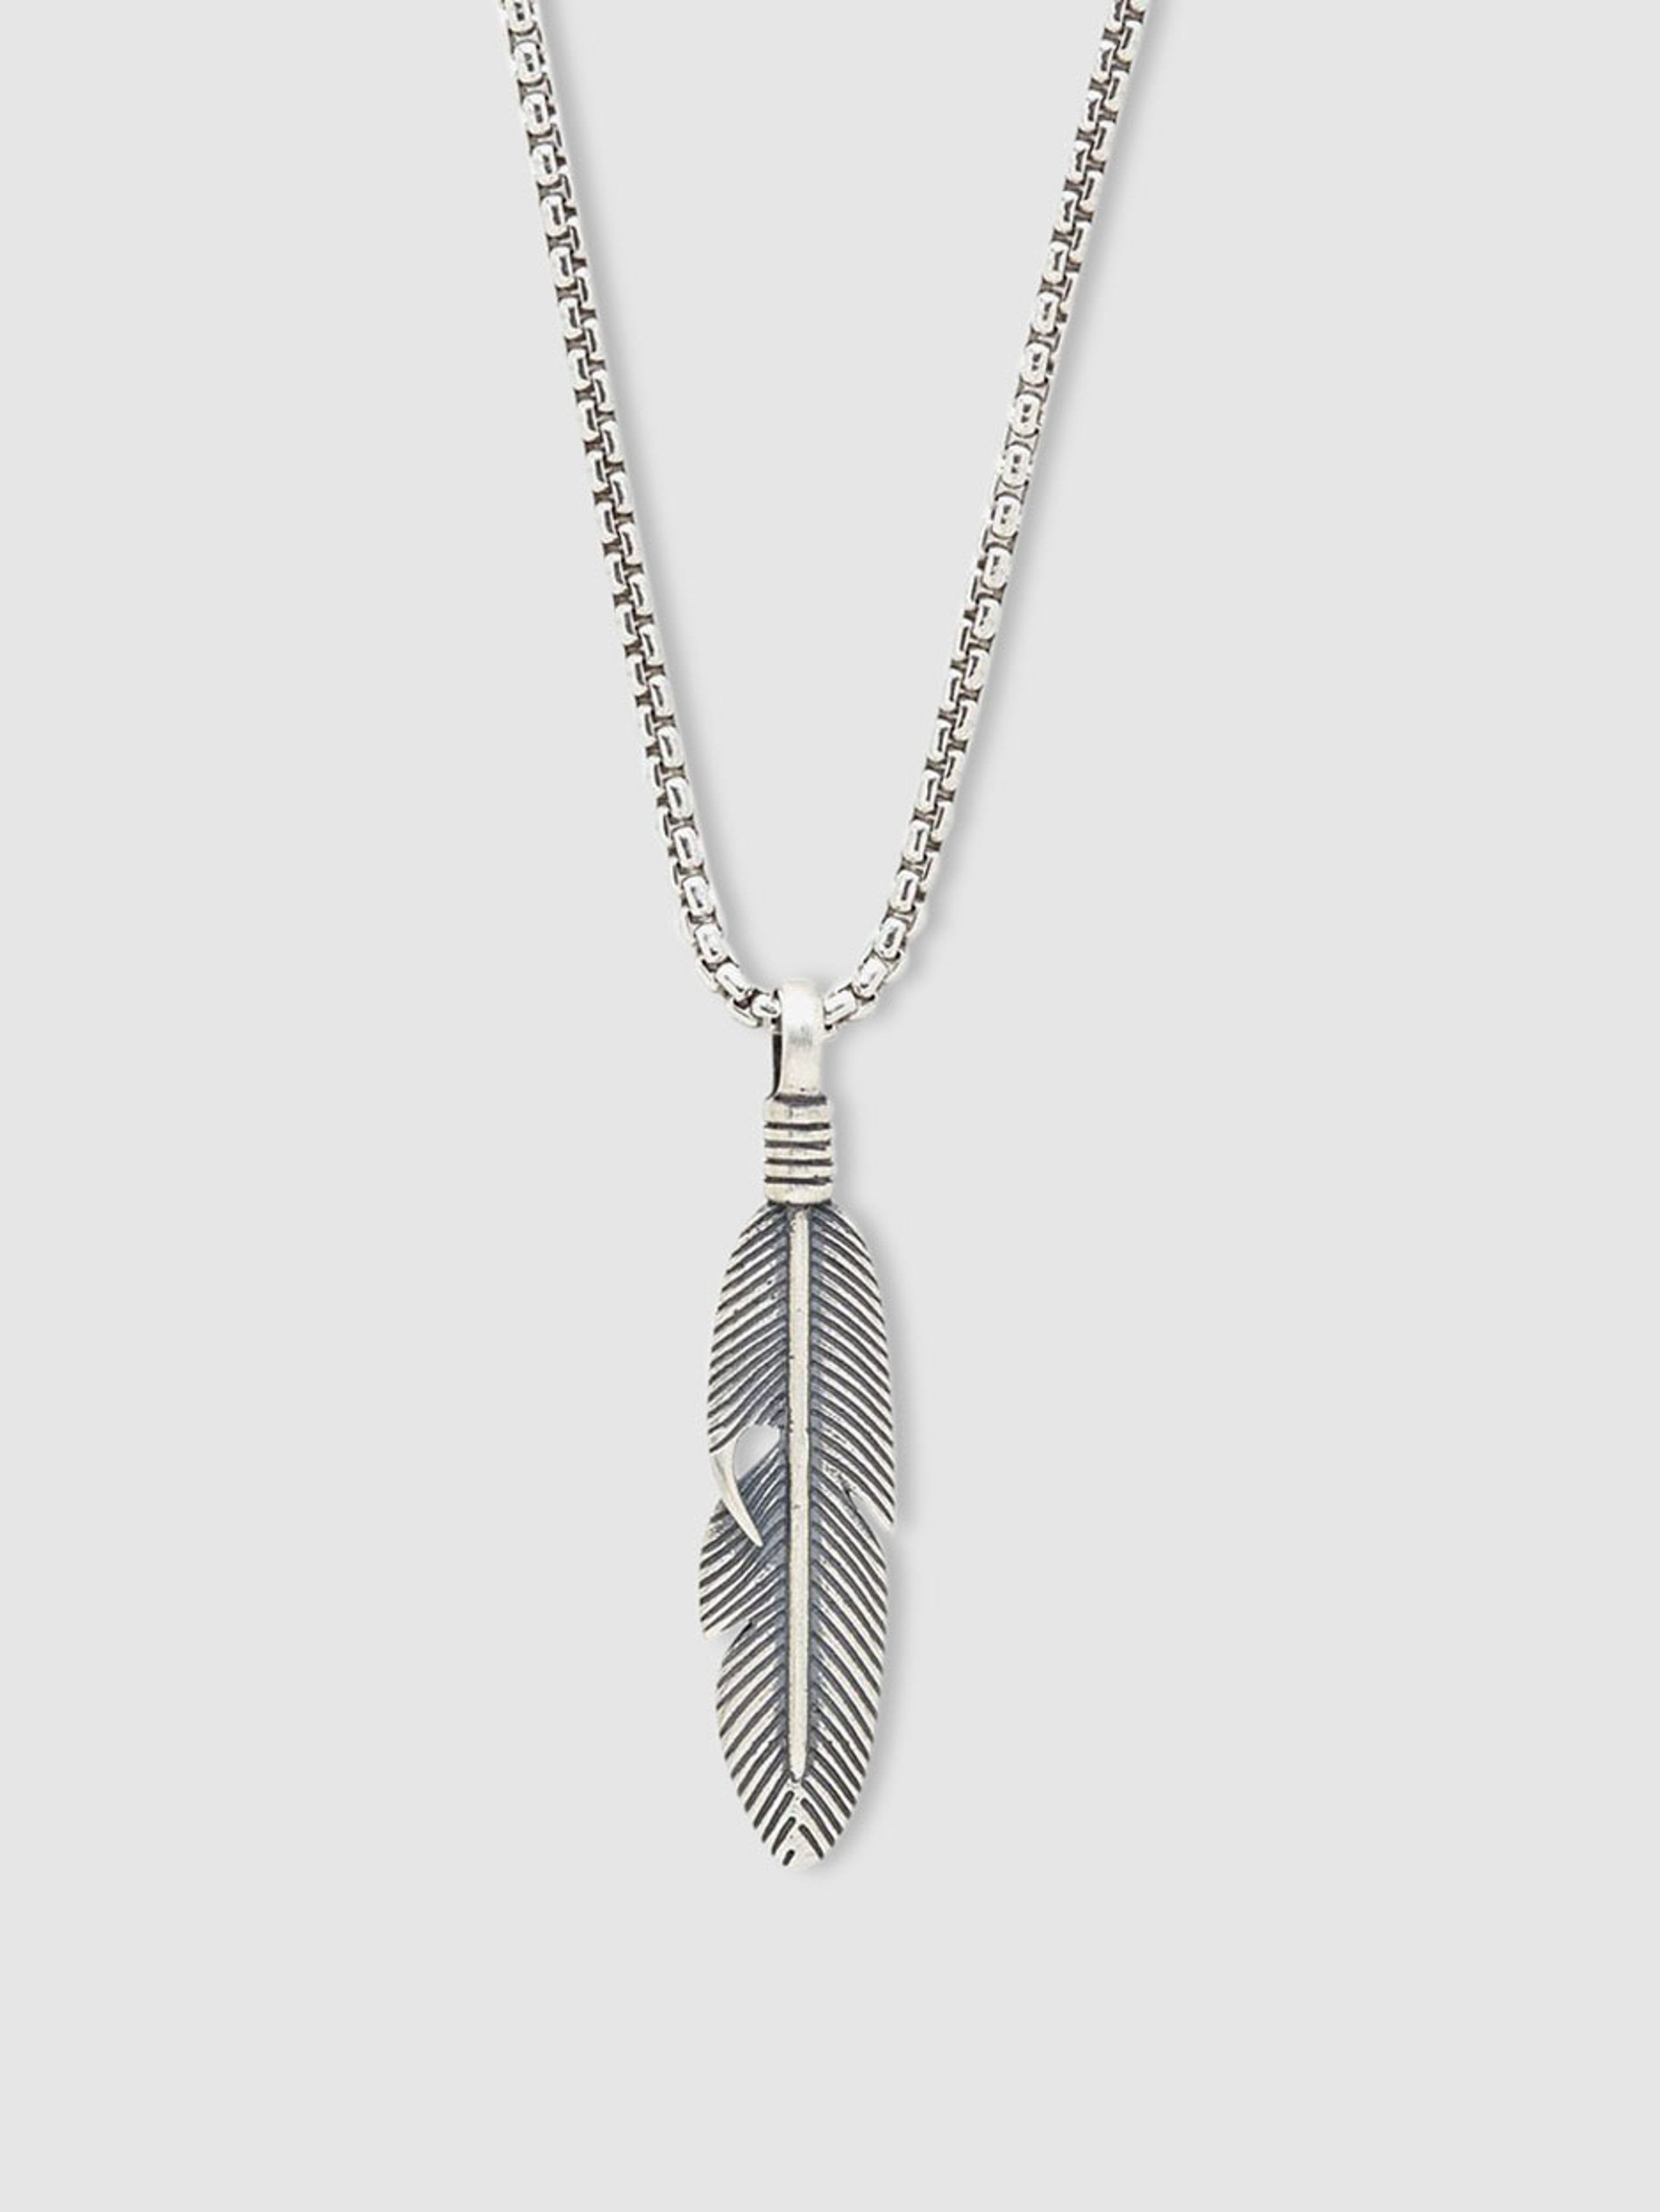 DEGS & SAL DEGS & SAL STERLING SILVER FEATHER NECKLACE